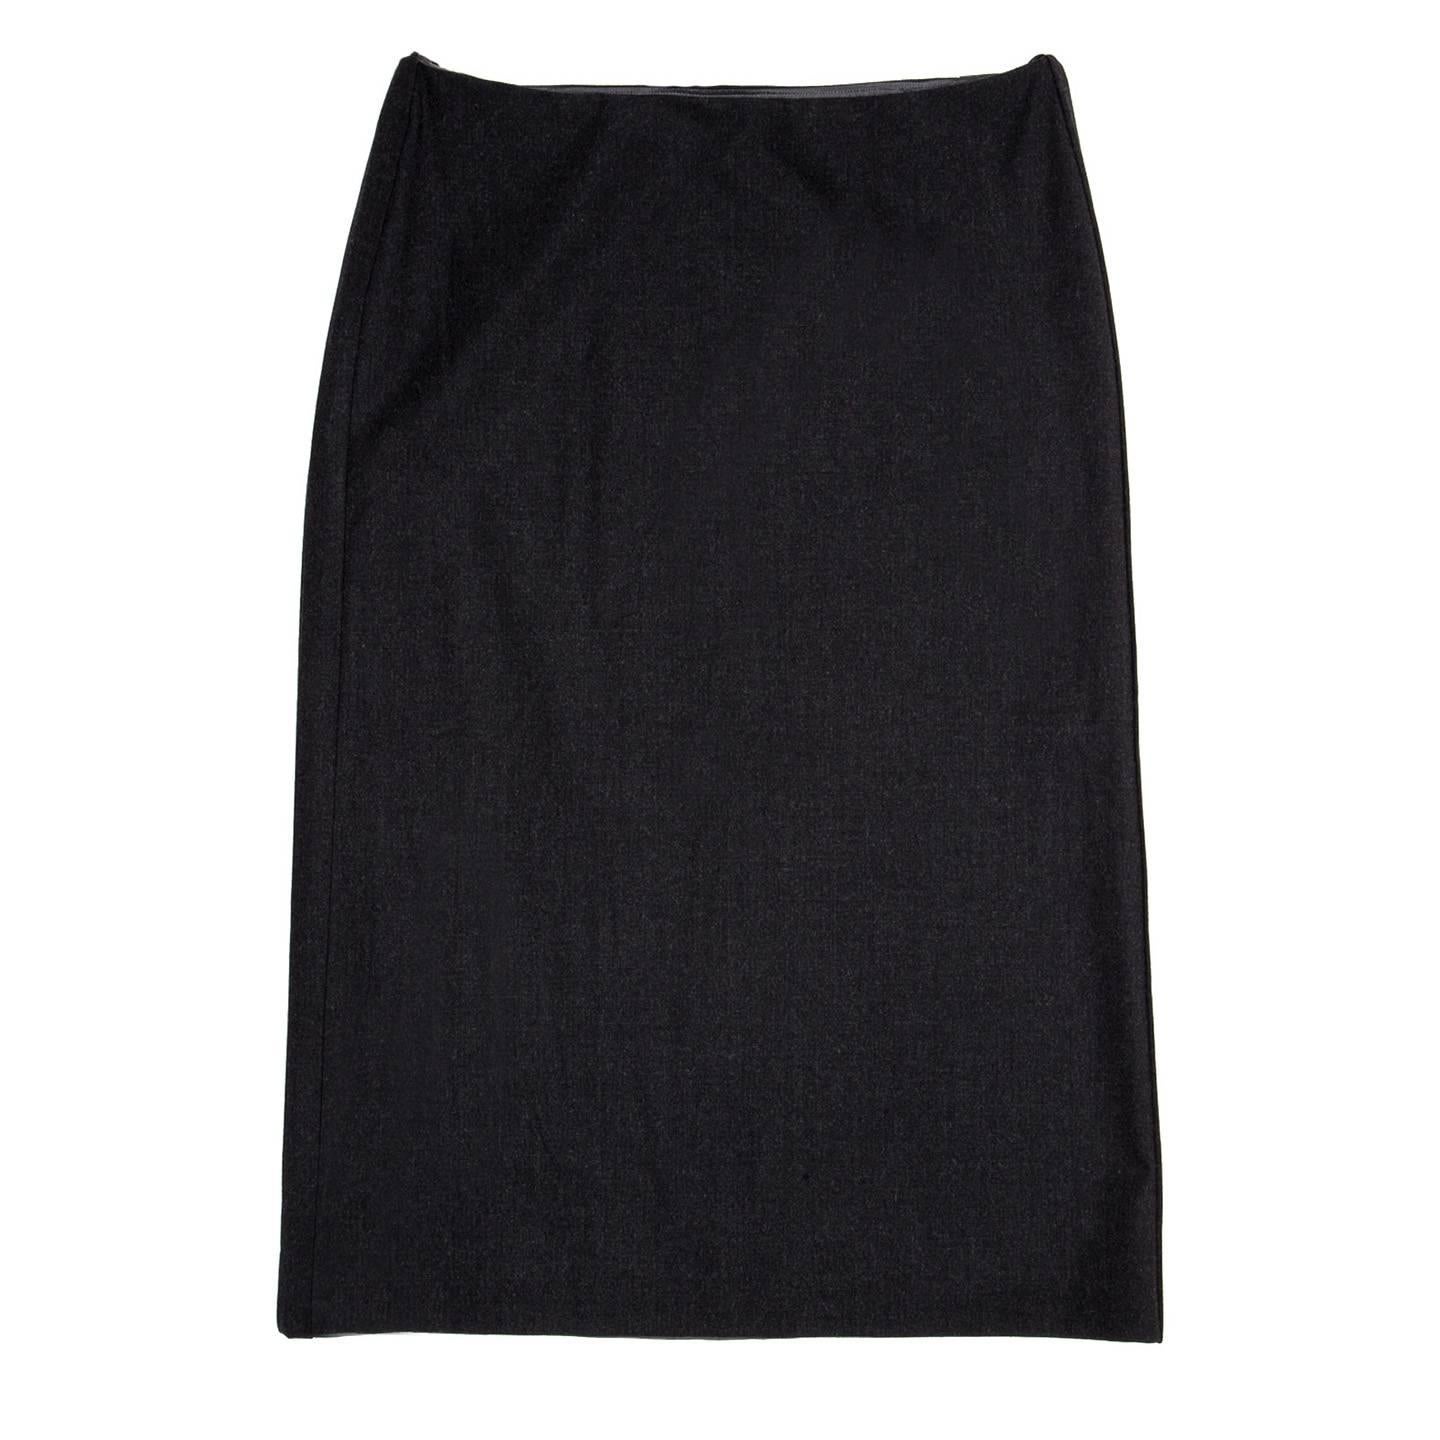 Elegant dark charcoal grey virgin wool skirt with a percentage of stretch that makes it more comfortable. From waist to hem a combination of two fixed inverted and box pleats at side seams enrich the straight cut of the skirt. The waistline is low